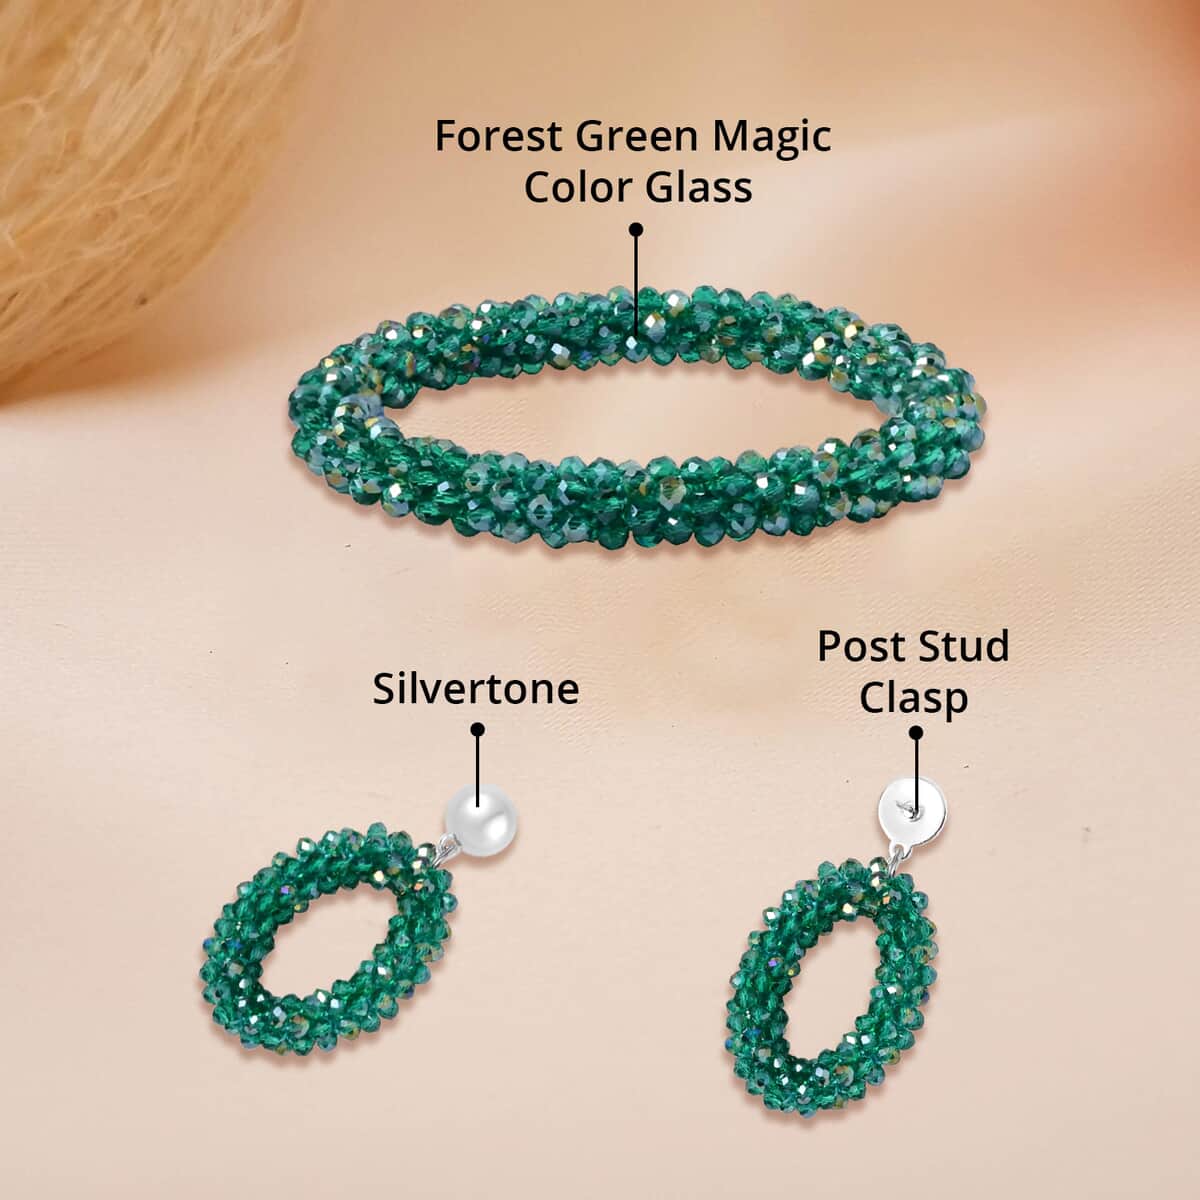 Forest Green Magic Color Glass Beaded Bracelet (7.0-7.50In) and Earrings in Silvertone image number 4